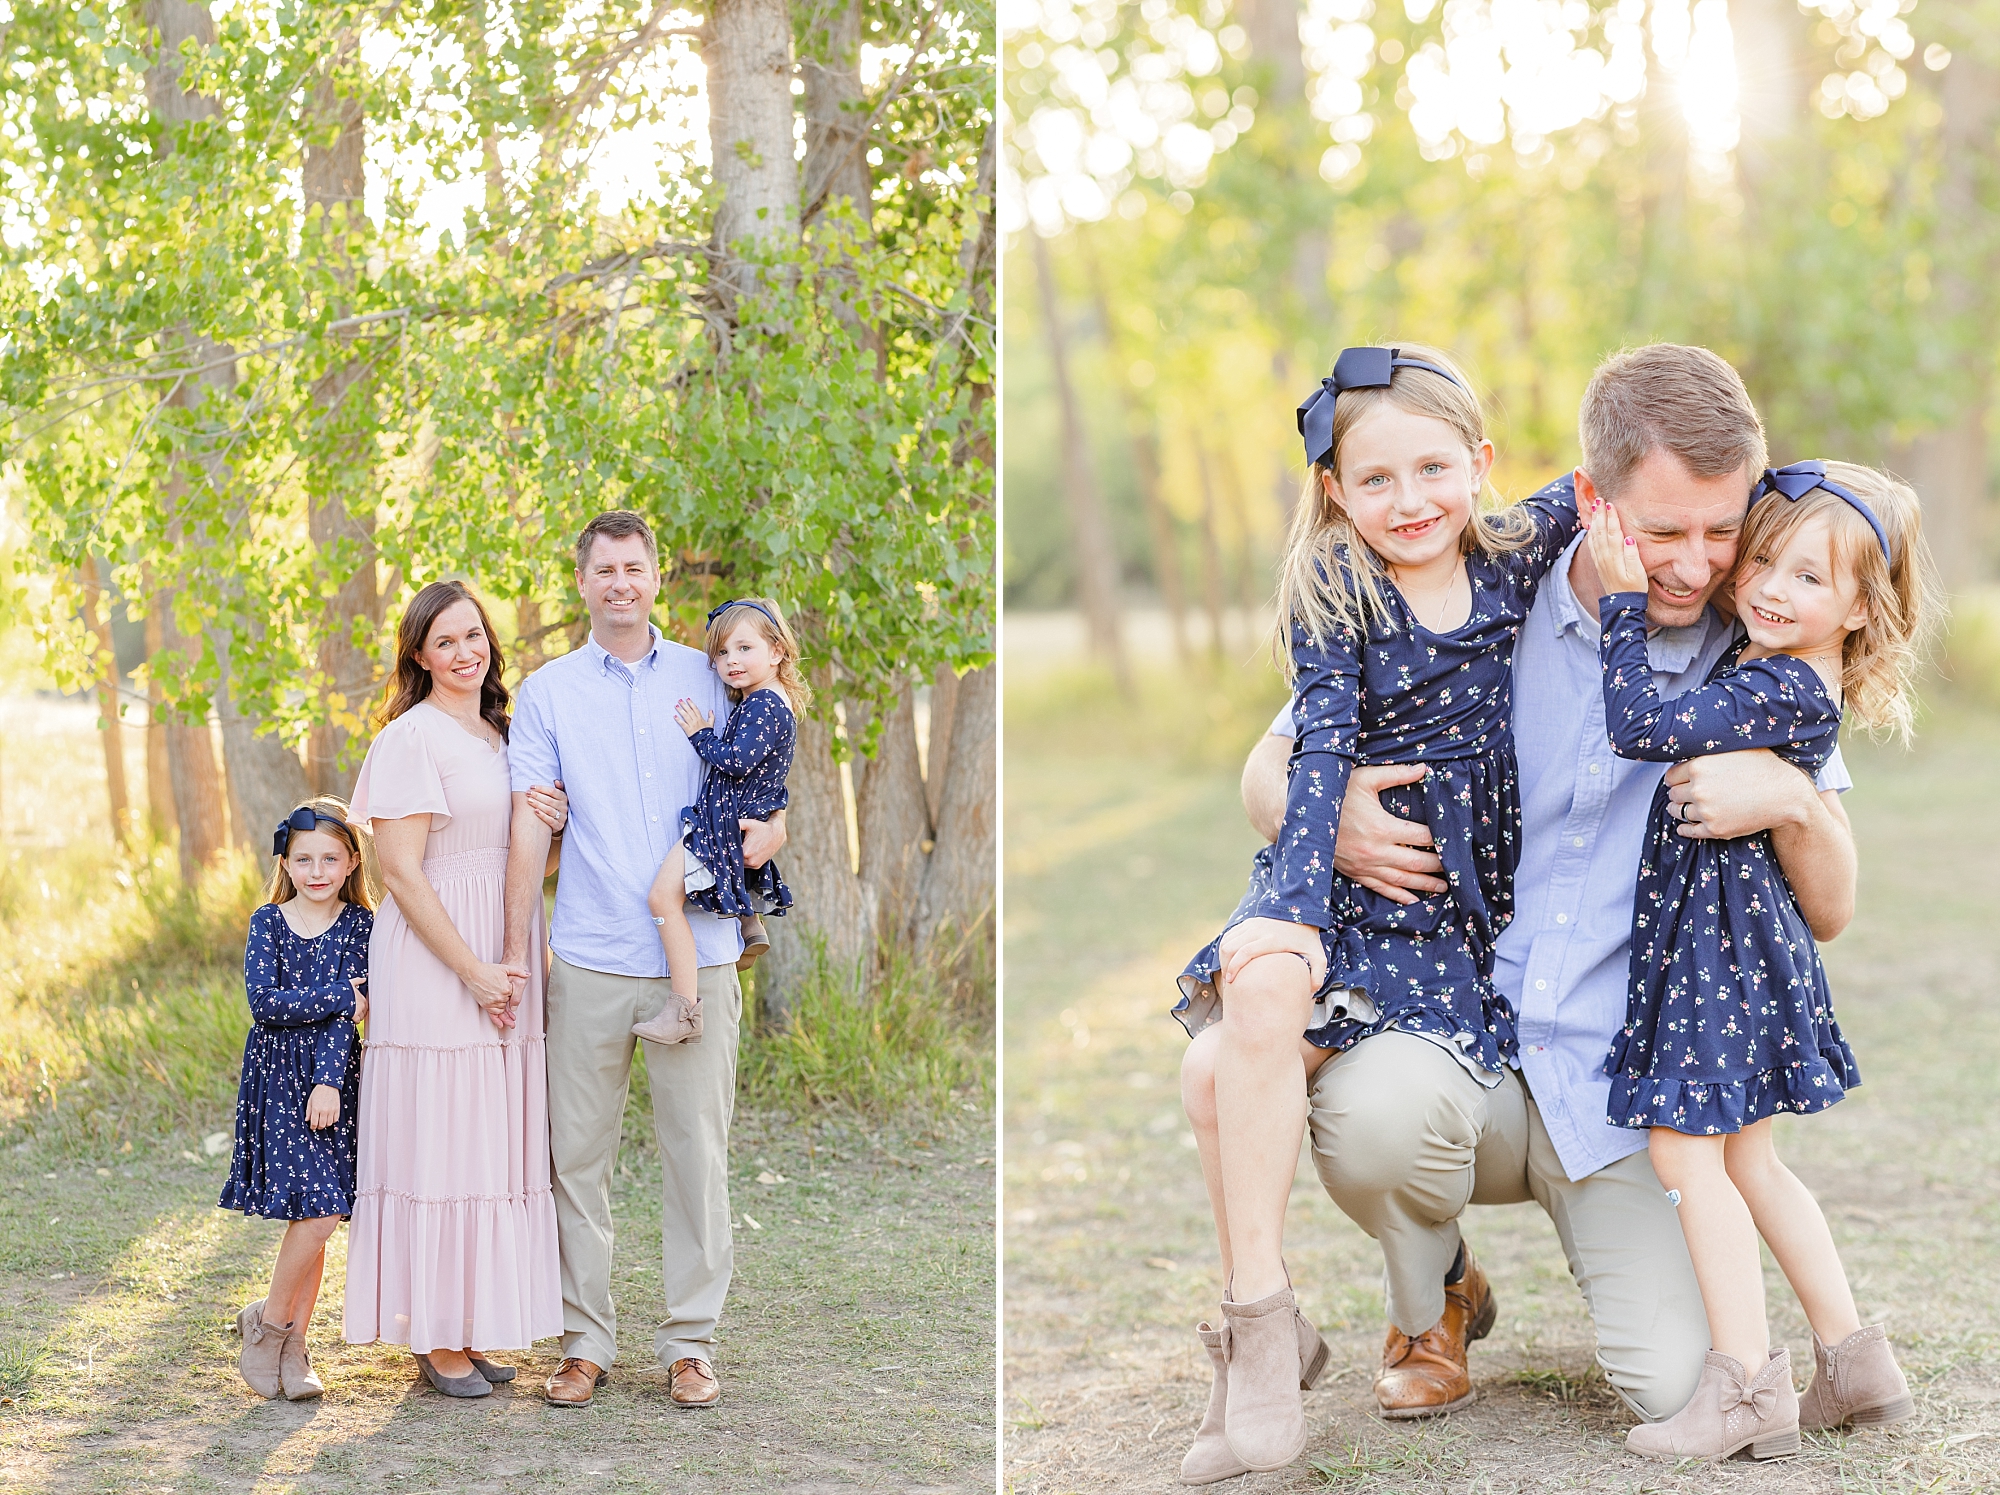 A Glowy Summer Evening Family Portrait Session